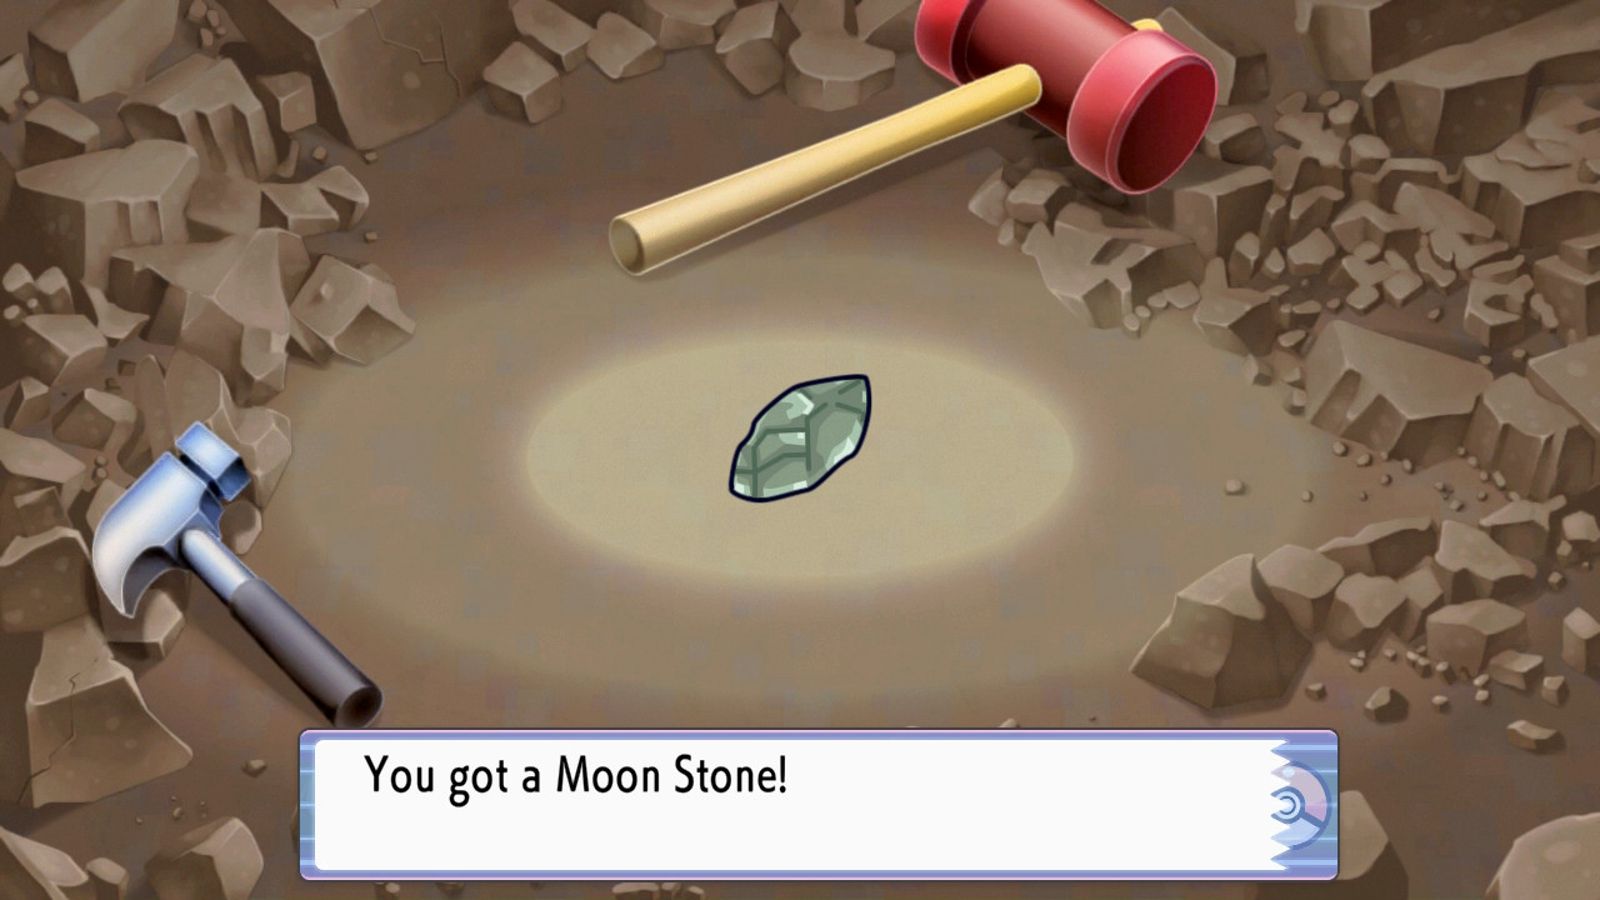 Moon Stones can be used to evolve Pokémon in Brilliant Diamond and Shining Pearl.